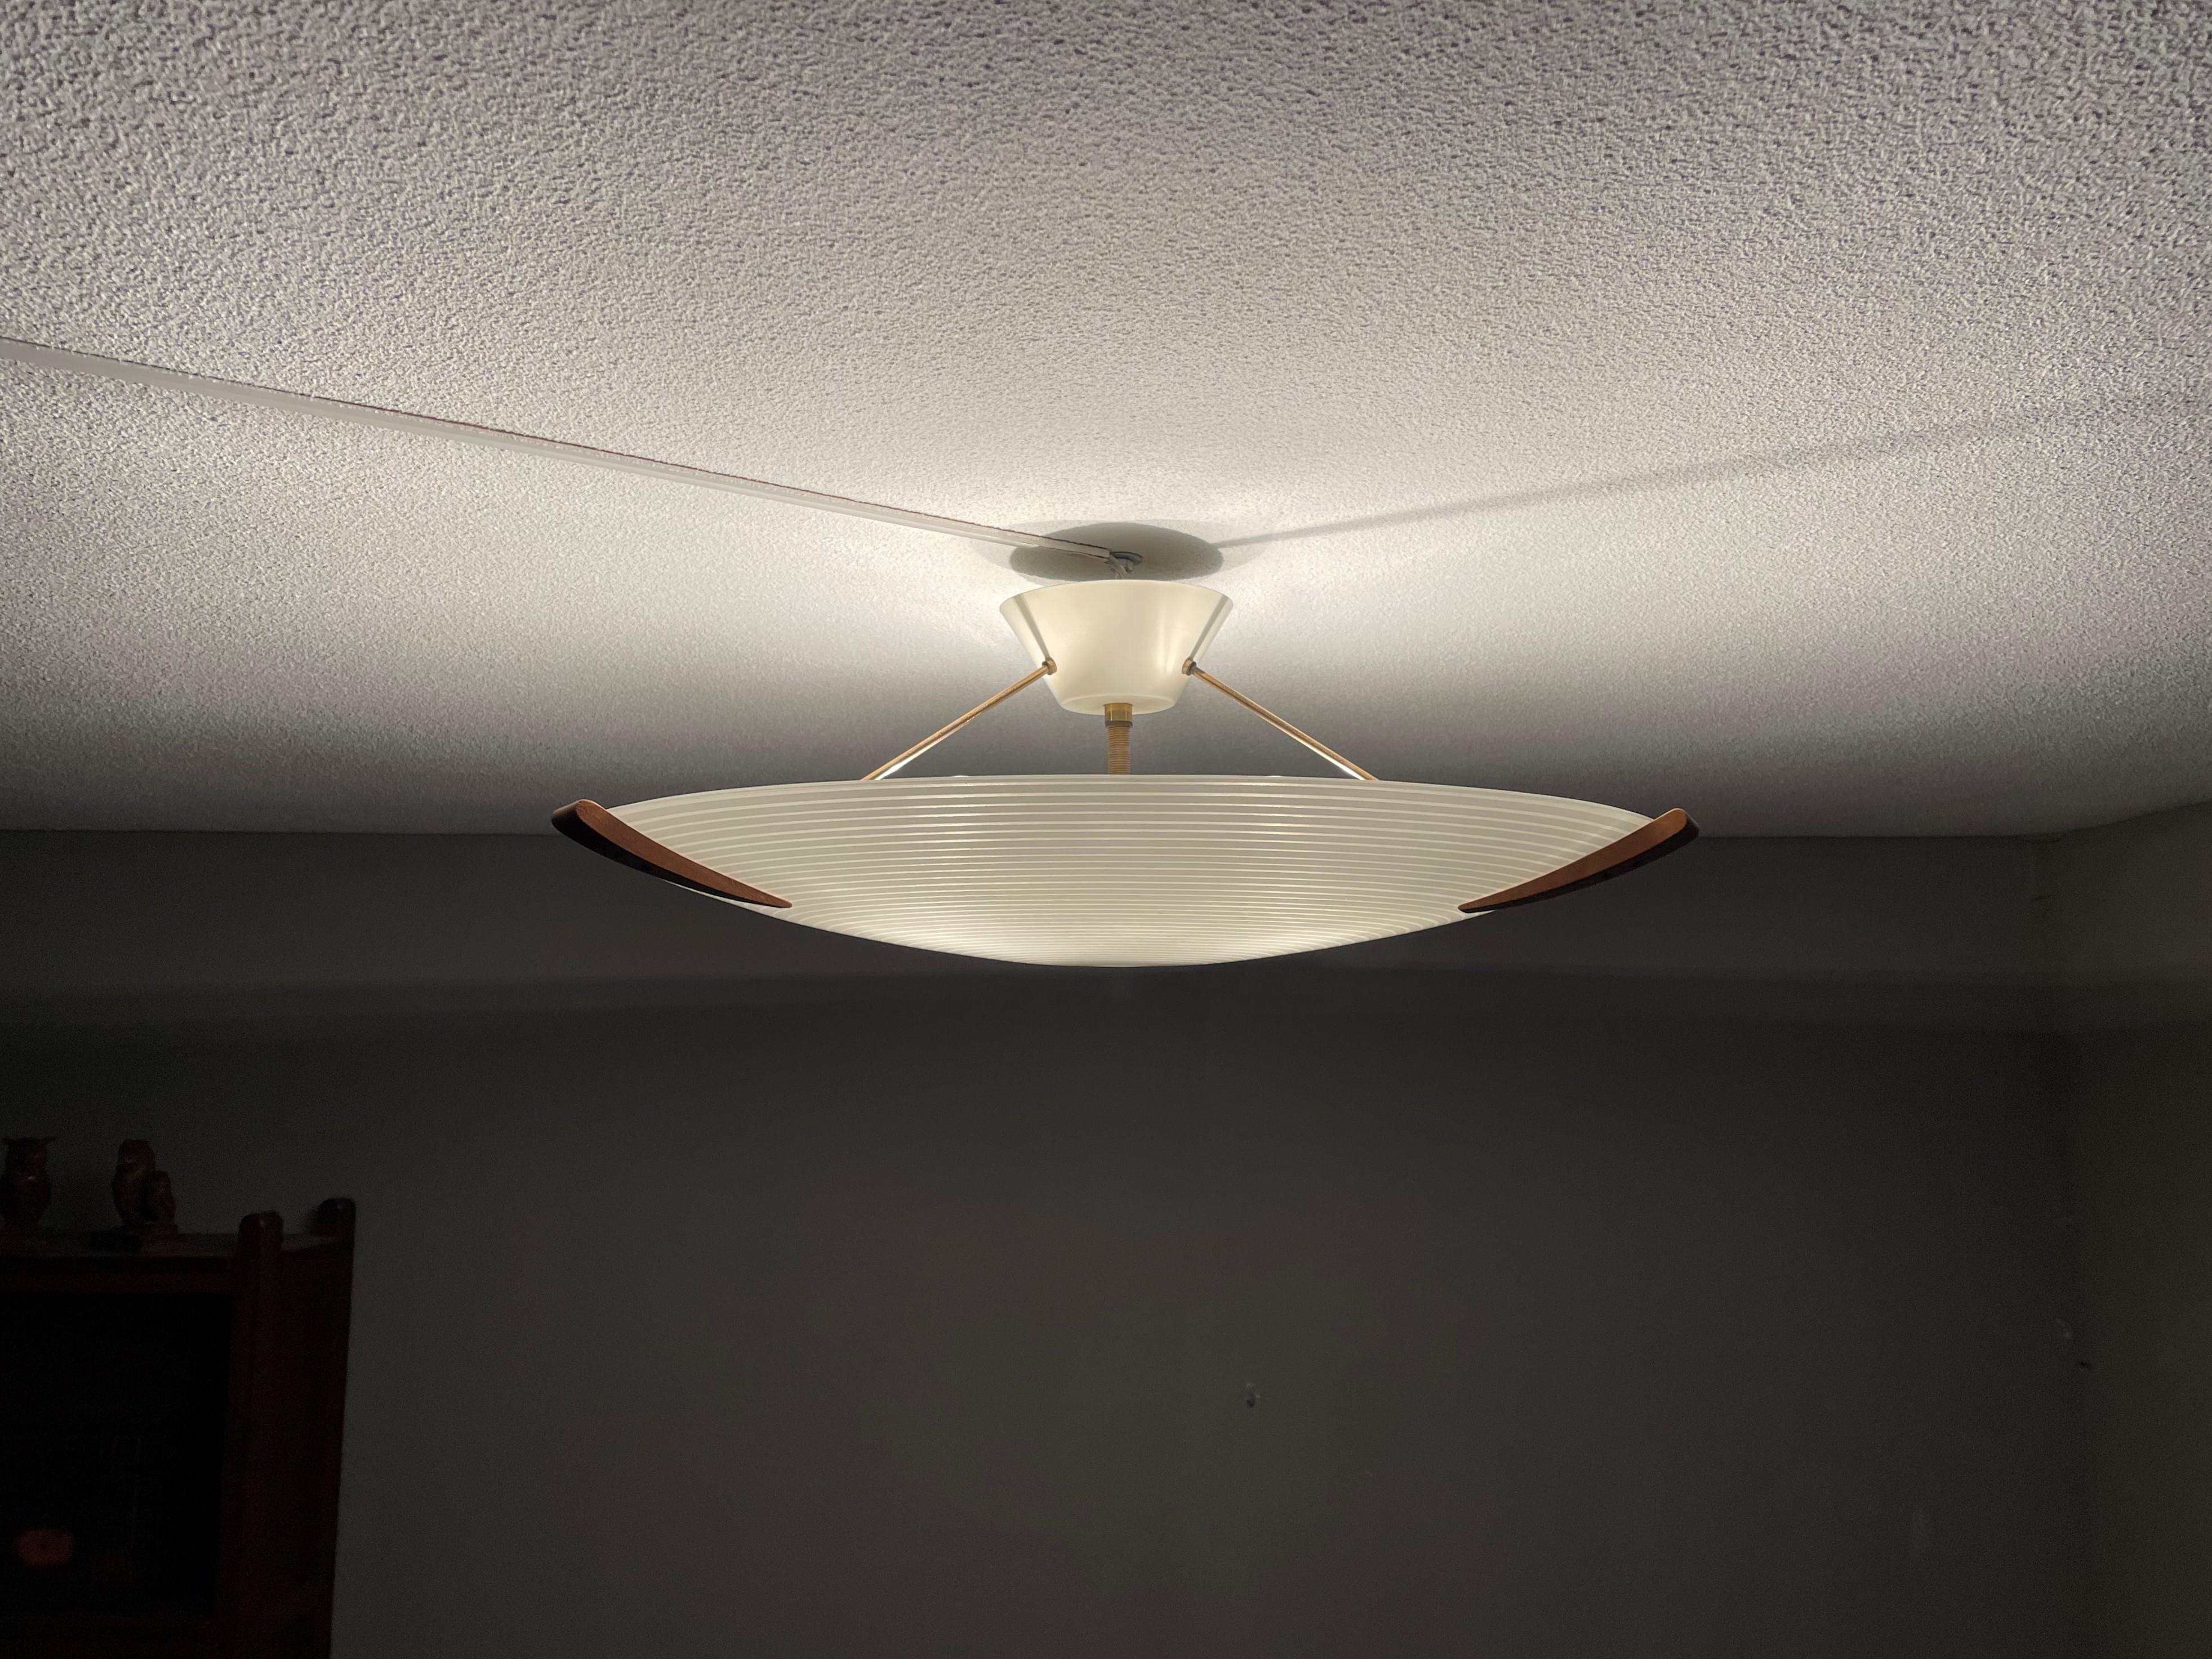 Great Mid-Century Modern design ceiling light with teakwood and circular pattern in the glass shade.

This vintage light fixture has a beautiful look and feel and you will hardly ever find a light fixture from the Mid-Century Modern era with a more